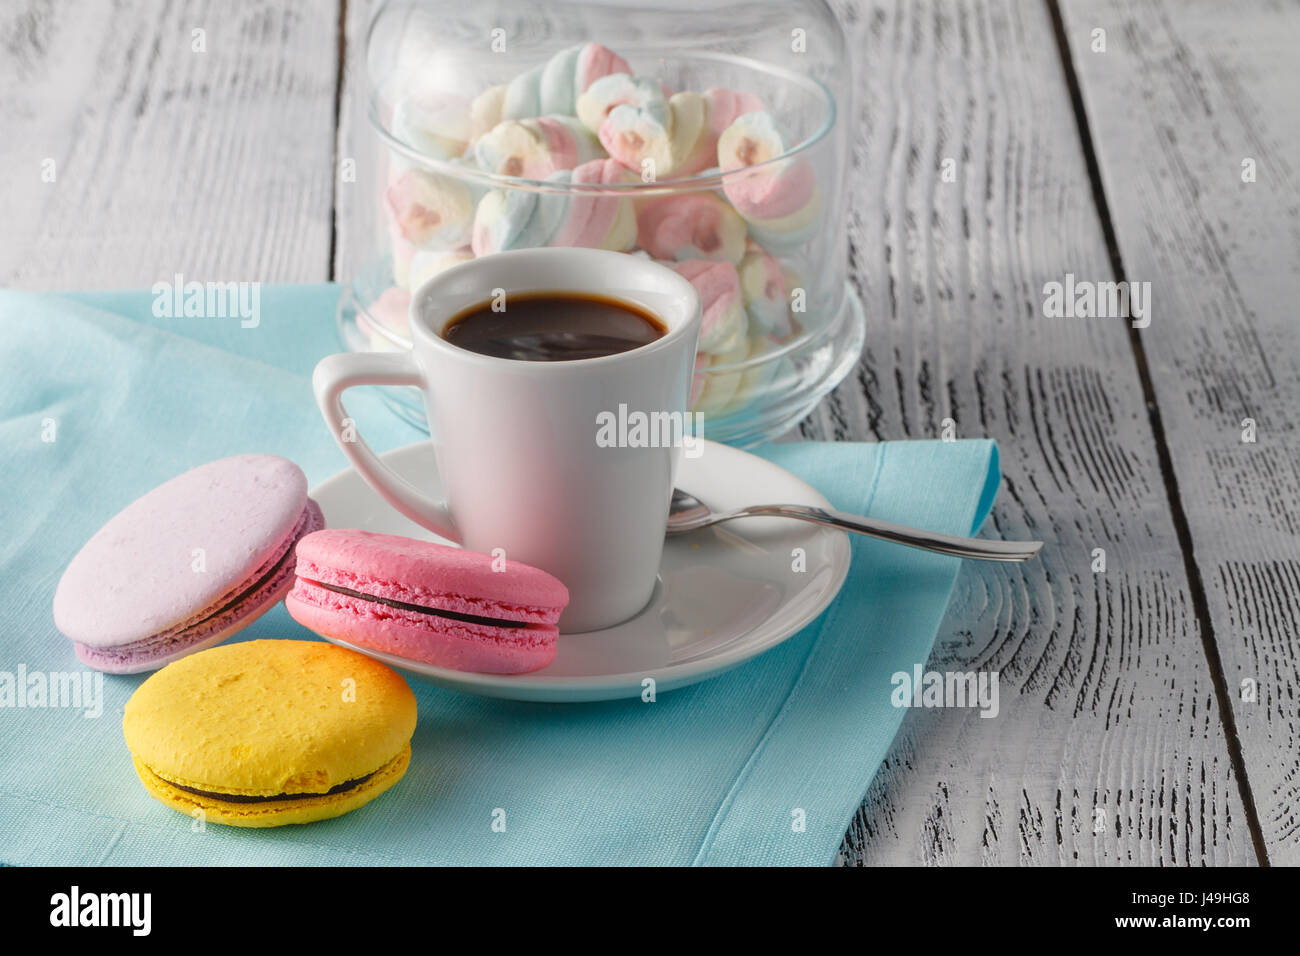 Breakfast with French colorful macarons and a espresso coffee cup Stock Photo